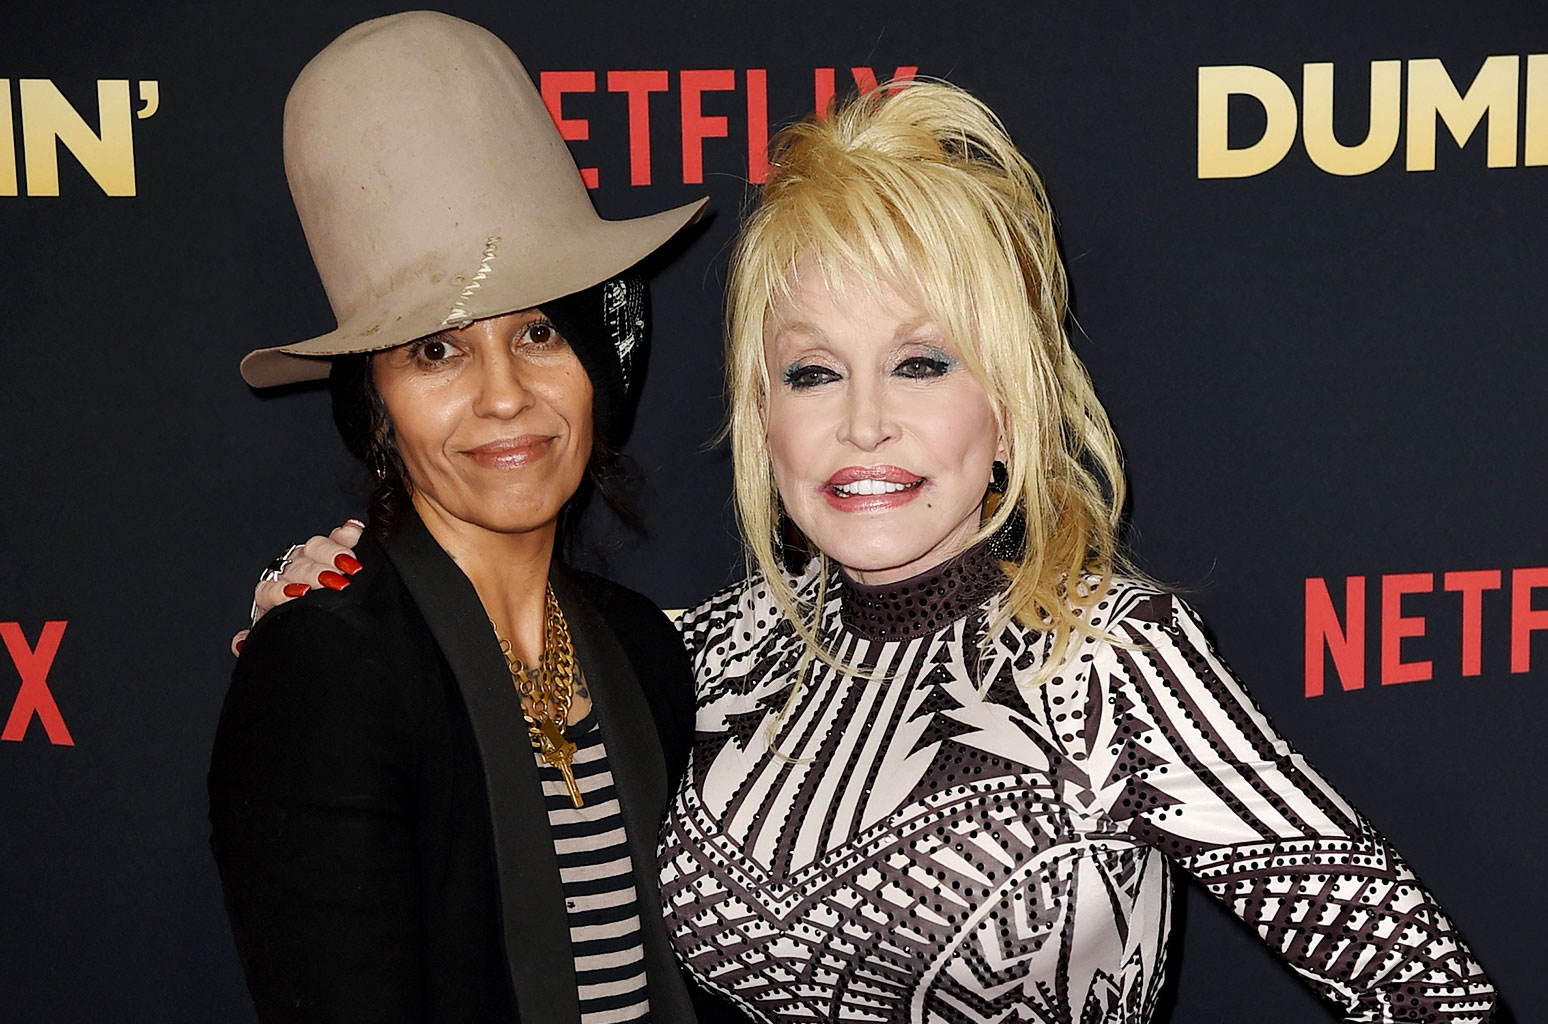 Jennifer Aniston - Linda Perry - Dolly Parton - Anne Fletcher - How 'Odd Couple Linda Perry and Dolly Parton Created Grammy-Nominated 'Dumplin' Song 'Girl in the Movies' - billboard.com